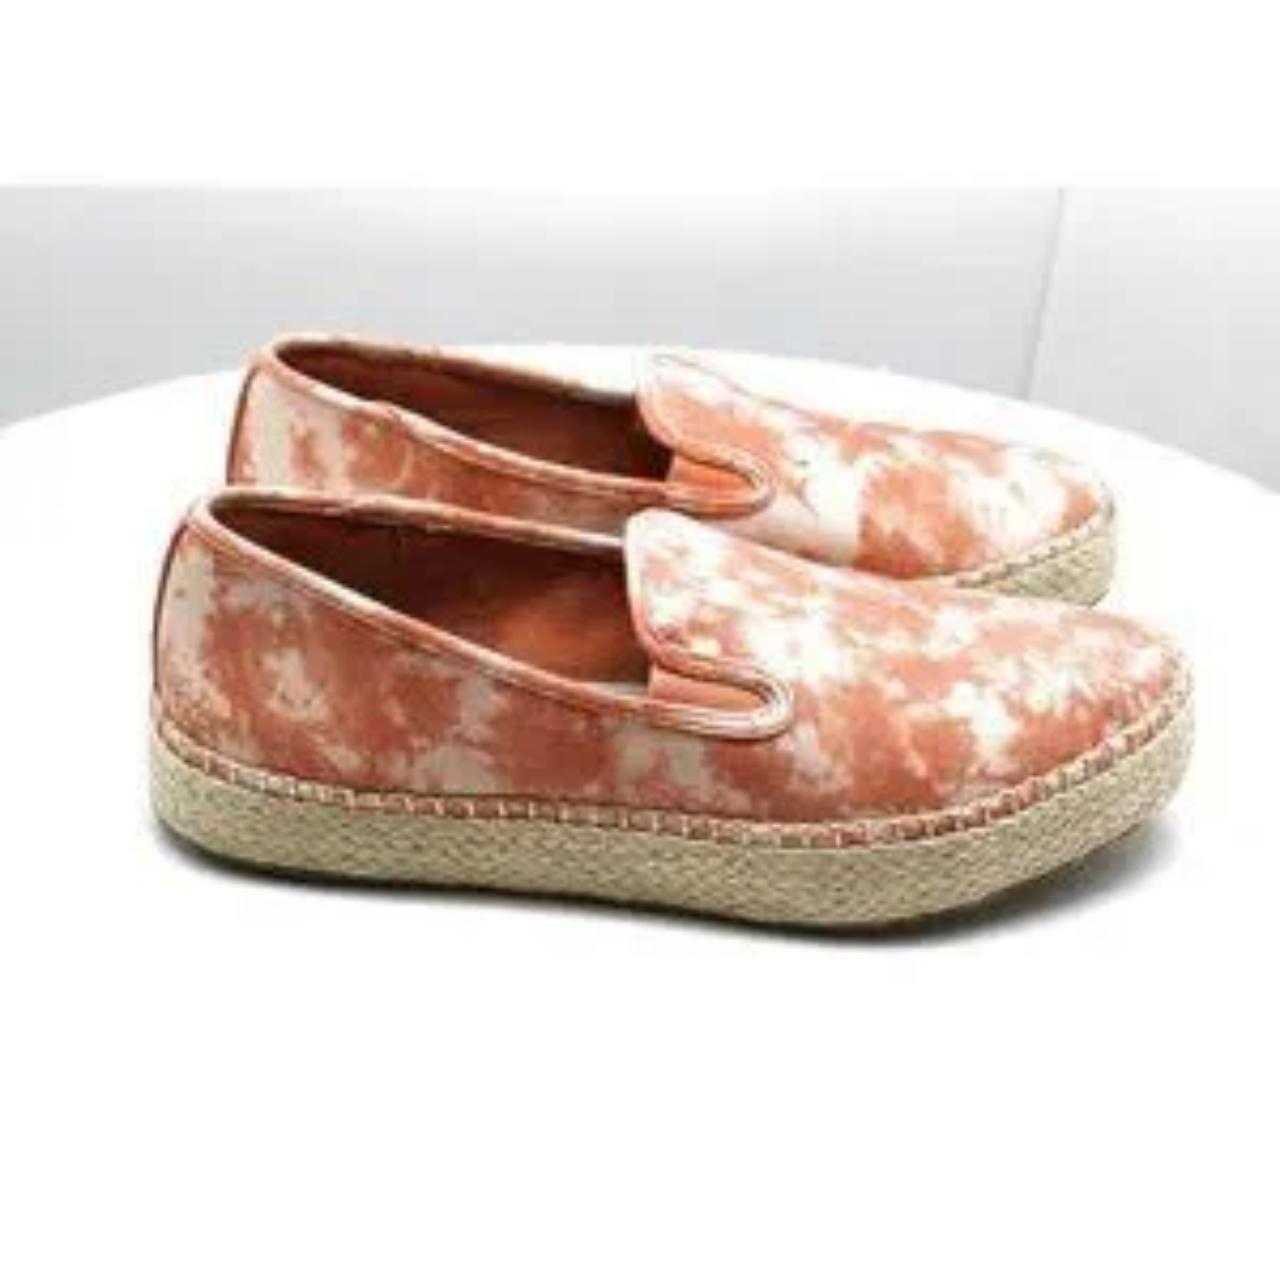 Product Image 2 - Dr. Scholl's Women's Madison Slip-ons